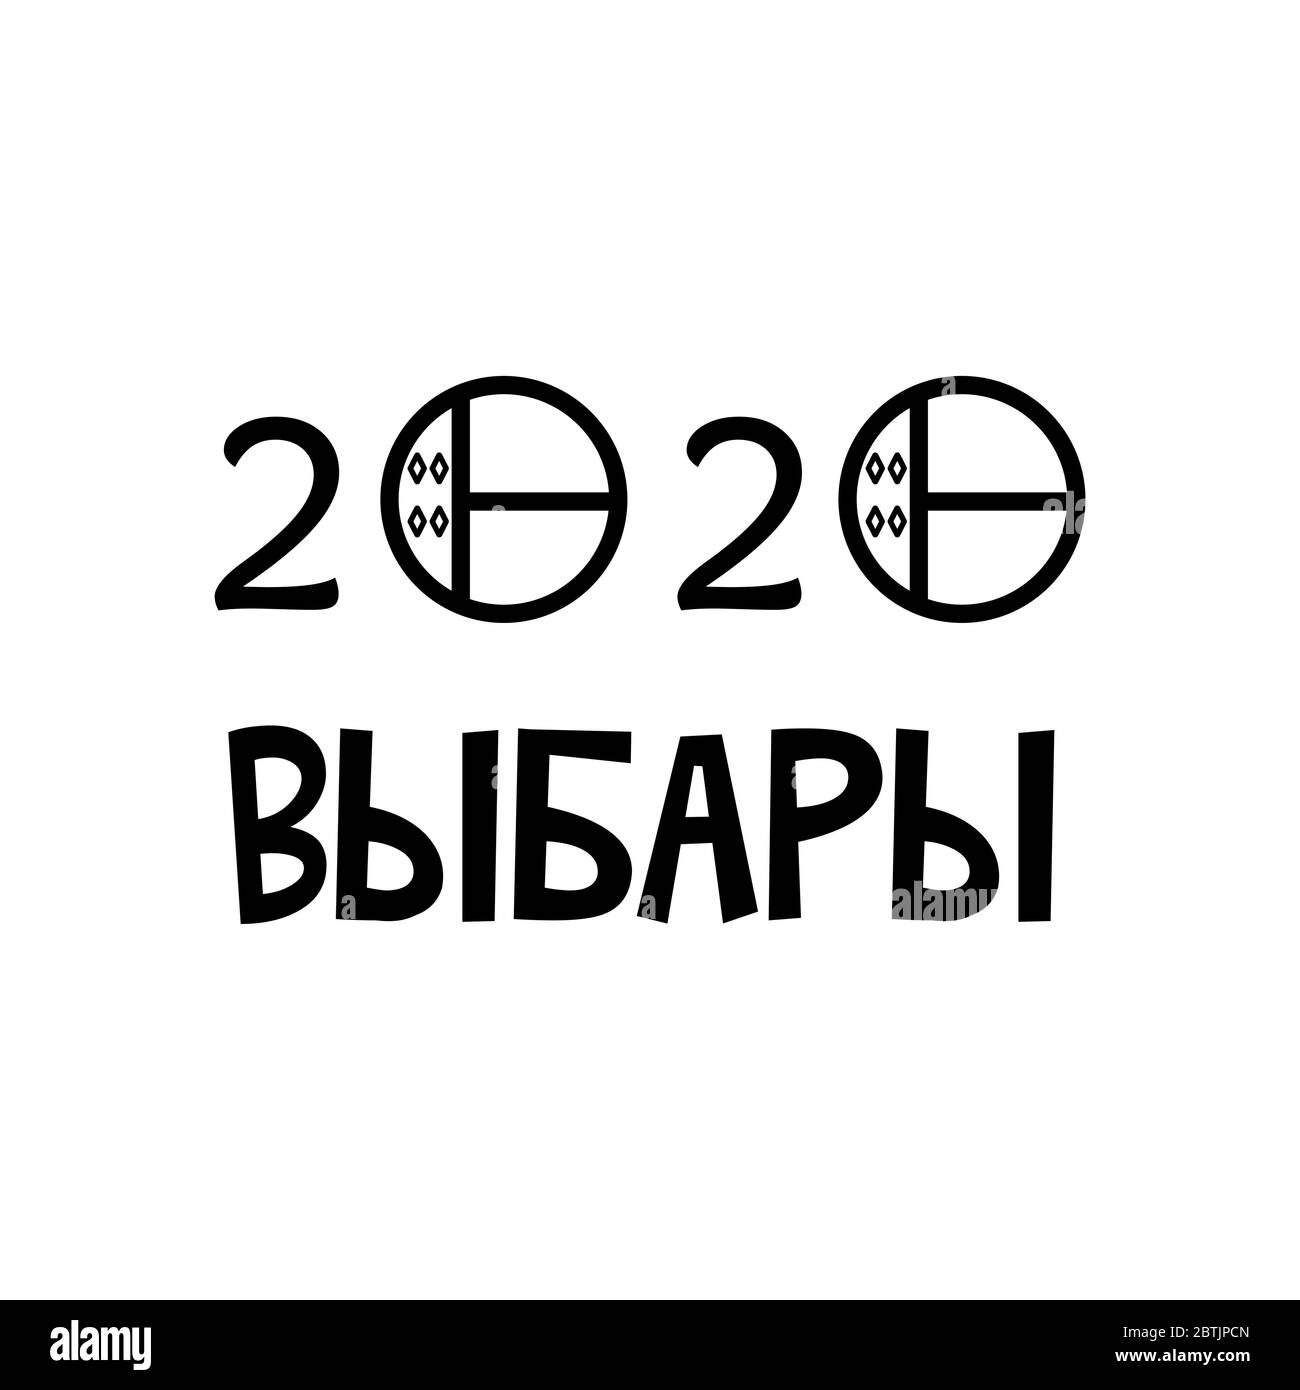 Presidential election 2020 in Belarus. Line style. Black and white vector illustration isolated on white background banner. Inscription Stock Vector